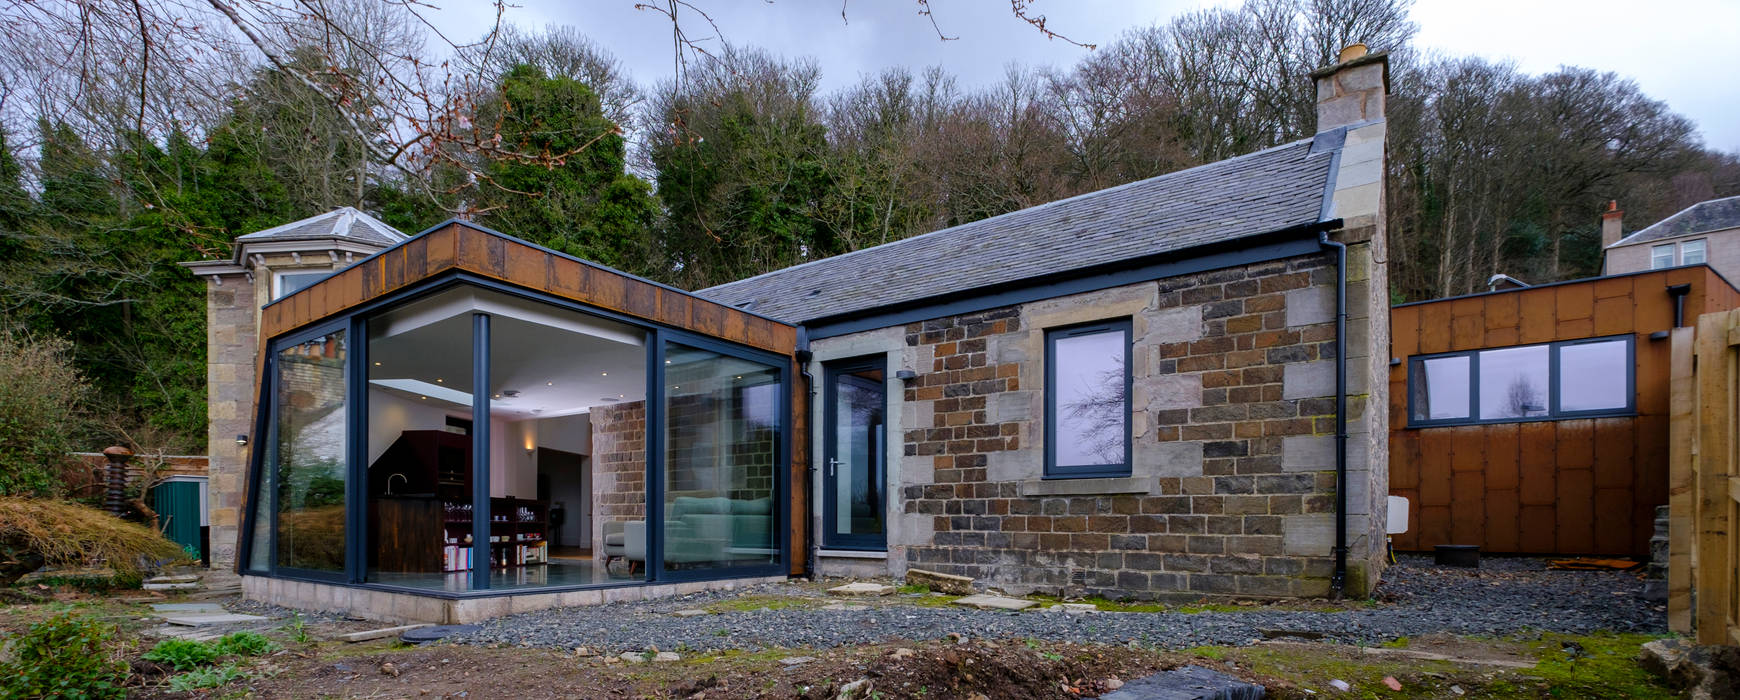 The rear extension to Woodend Cottage is clad in Corten steel and features large glass sliding doors Woodside Parker Kirk Architects Modern Evler Demir/Çelik Corten steel,cladding,cottage,extension,flat roof,alu-clad windows,daylight,garden